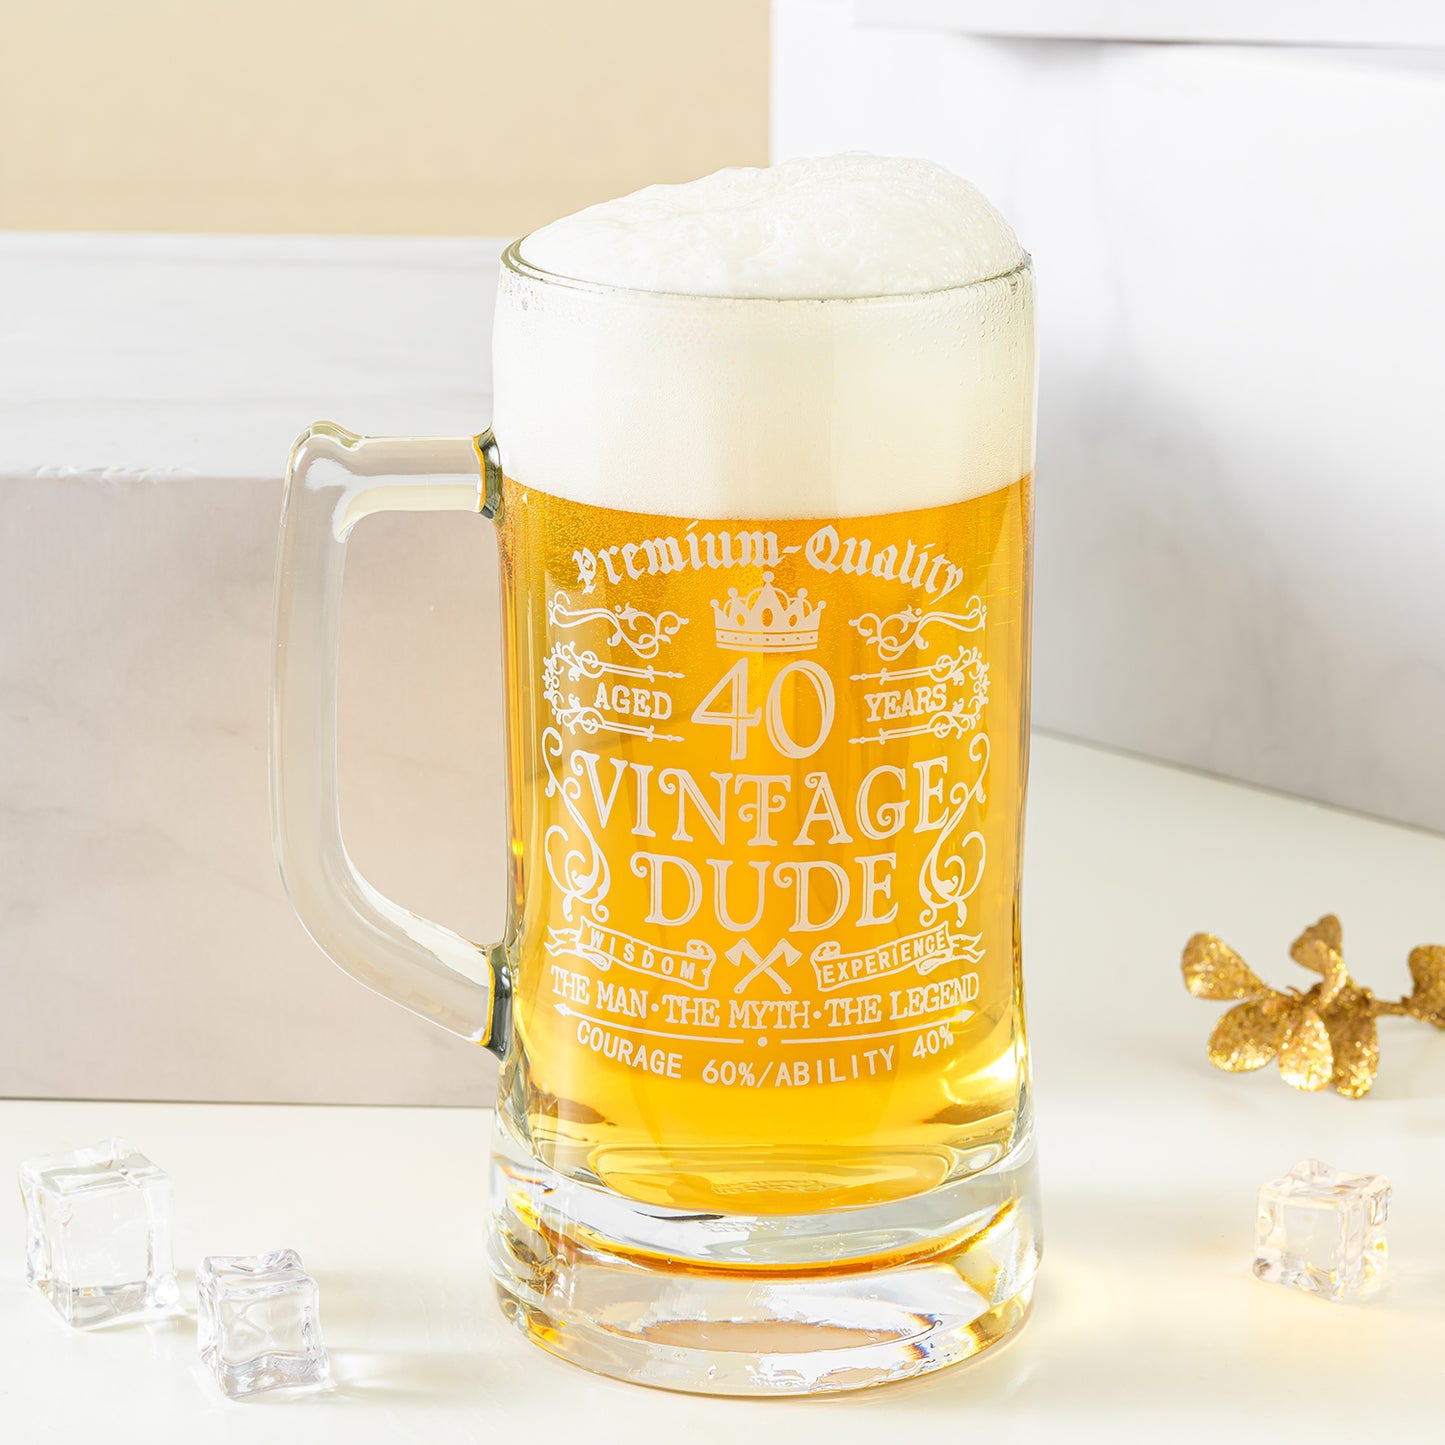 Crisky 40th Birthday Vintage Dude Beer Mug for Men 40 Years Old Gift 21 oz Birthday Beer Glass for Him, Husband, Father, Brother Friends Uncle Coworker, Large Capacity Beer Mug Gift, with Box